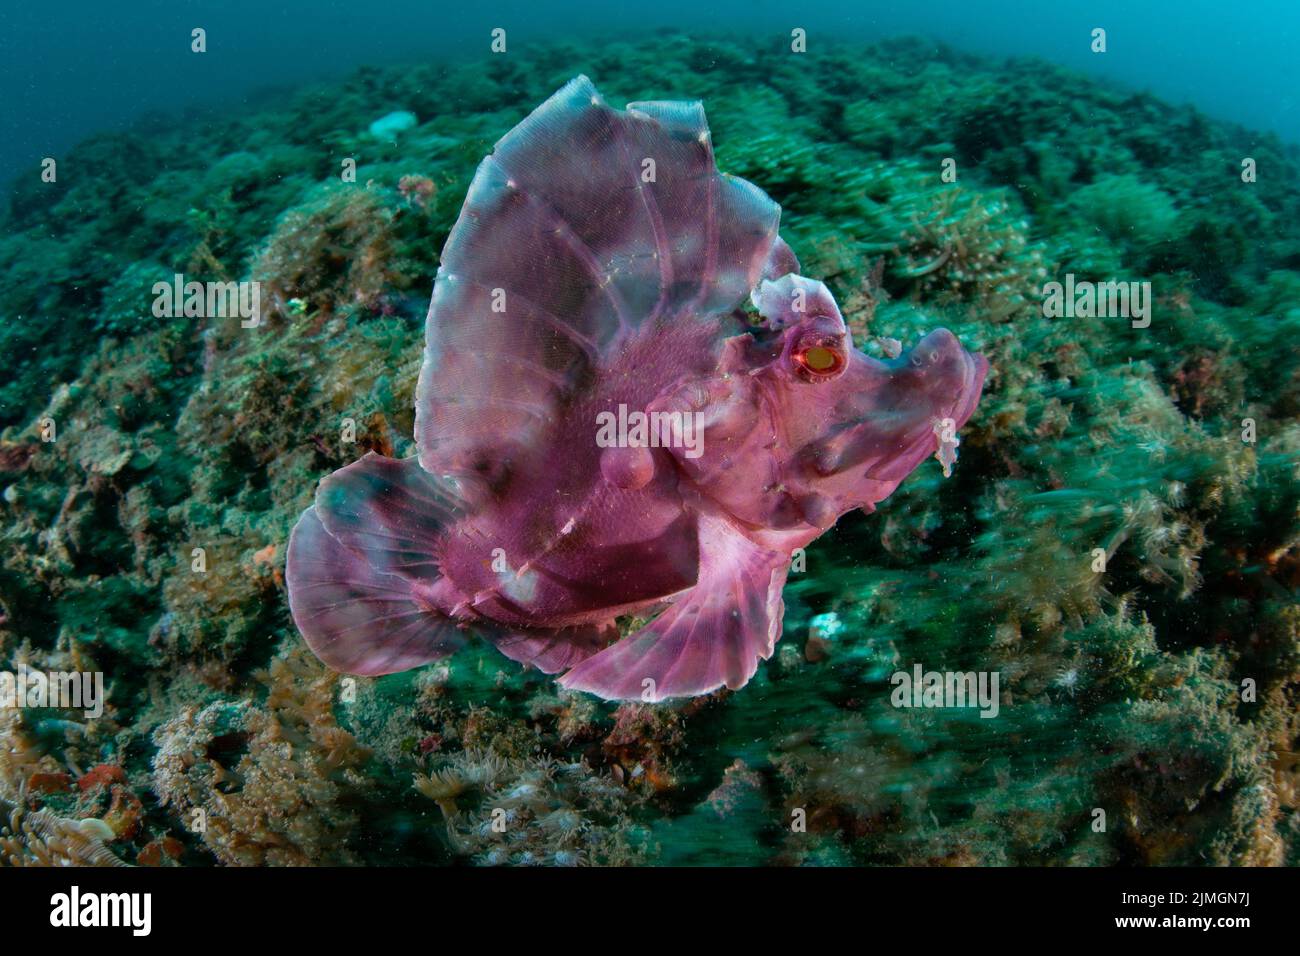 A Paddle-flap scorpionfish, Rhinopias eschmeyeri, is found on the seafloor of Lembeh Strait, Indonesia. This is an extremely rare species of fish. Stock Photo